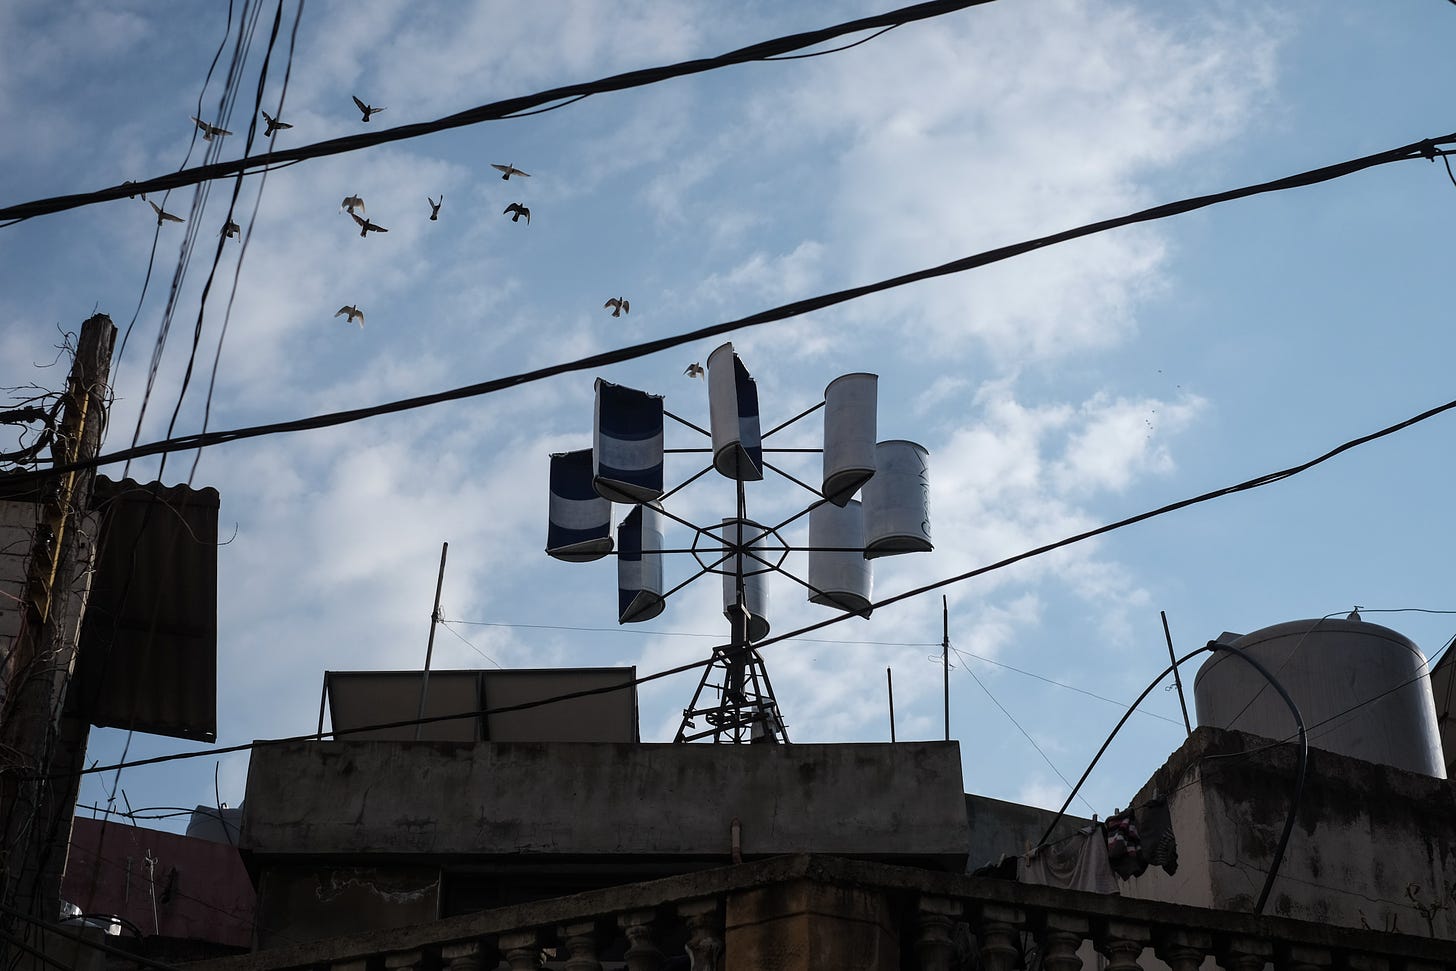 State power isn't keeping the lights on in Akkar. Can rooftop wind turbines  take over? - L'Orient Today